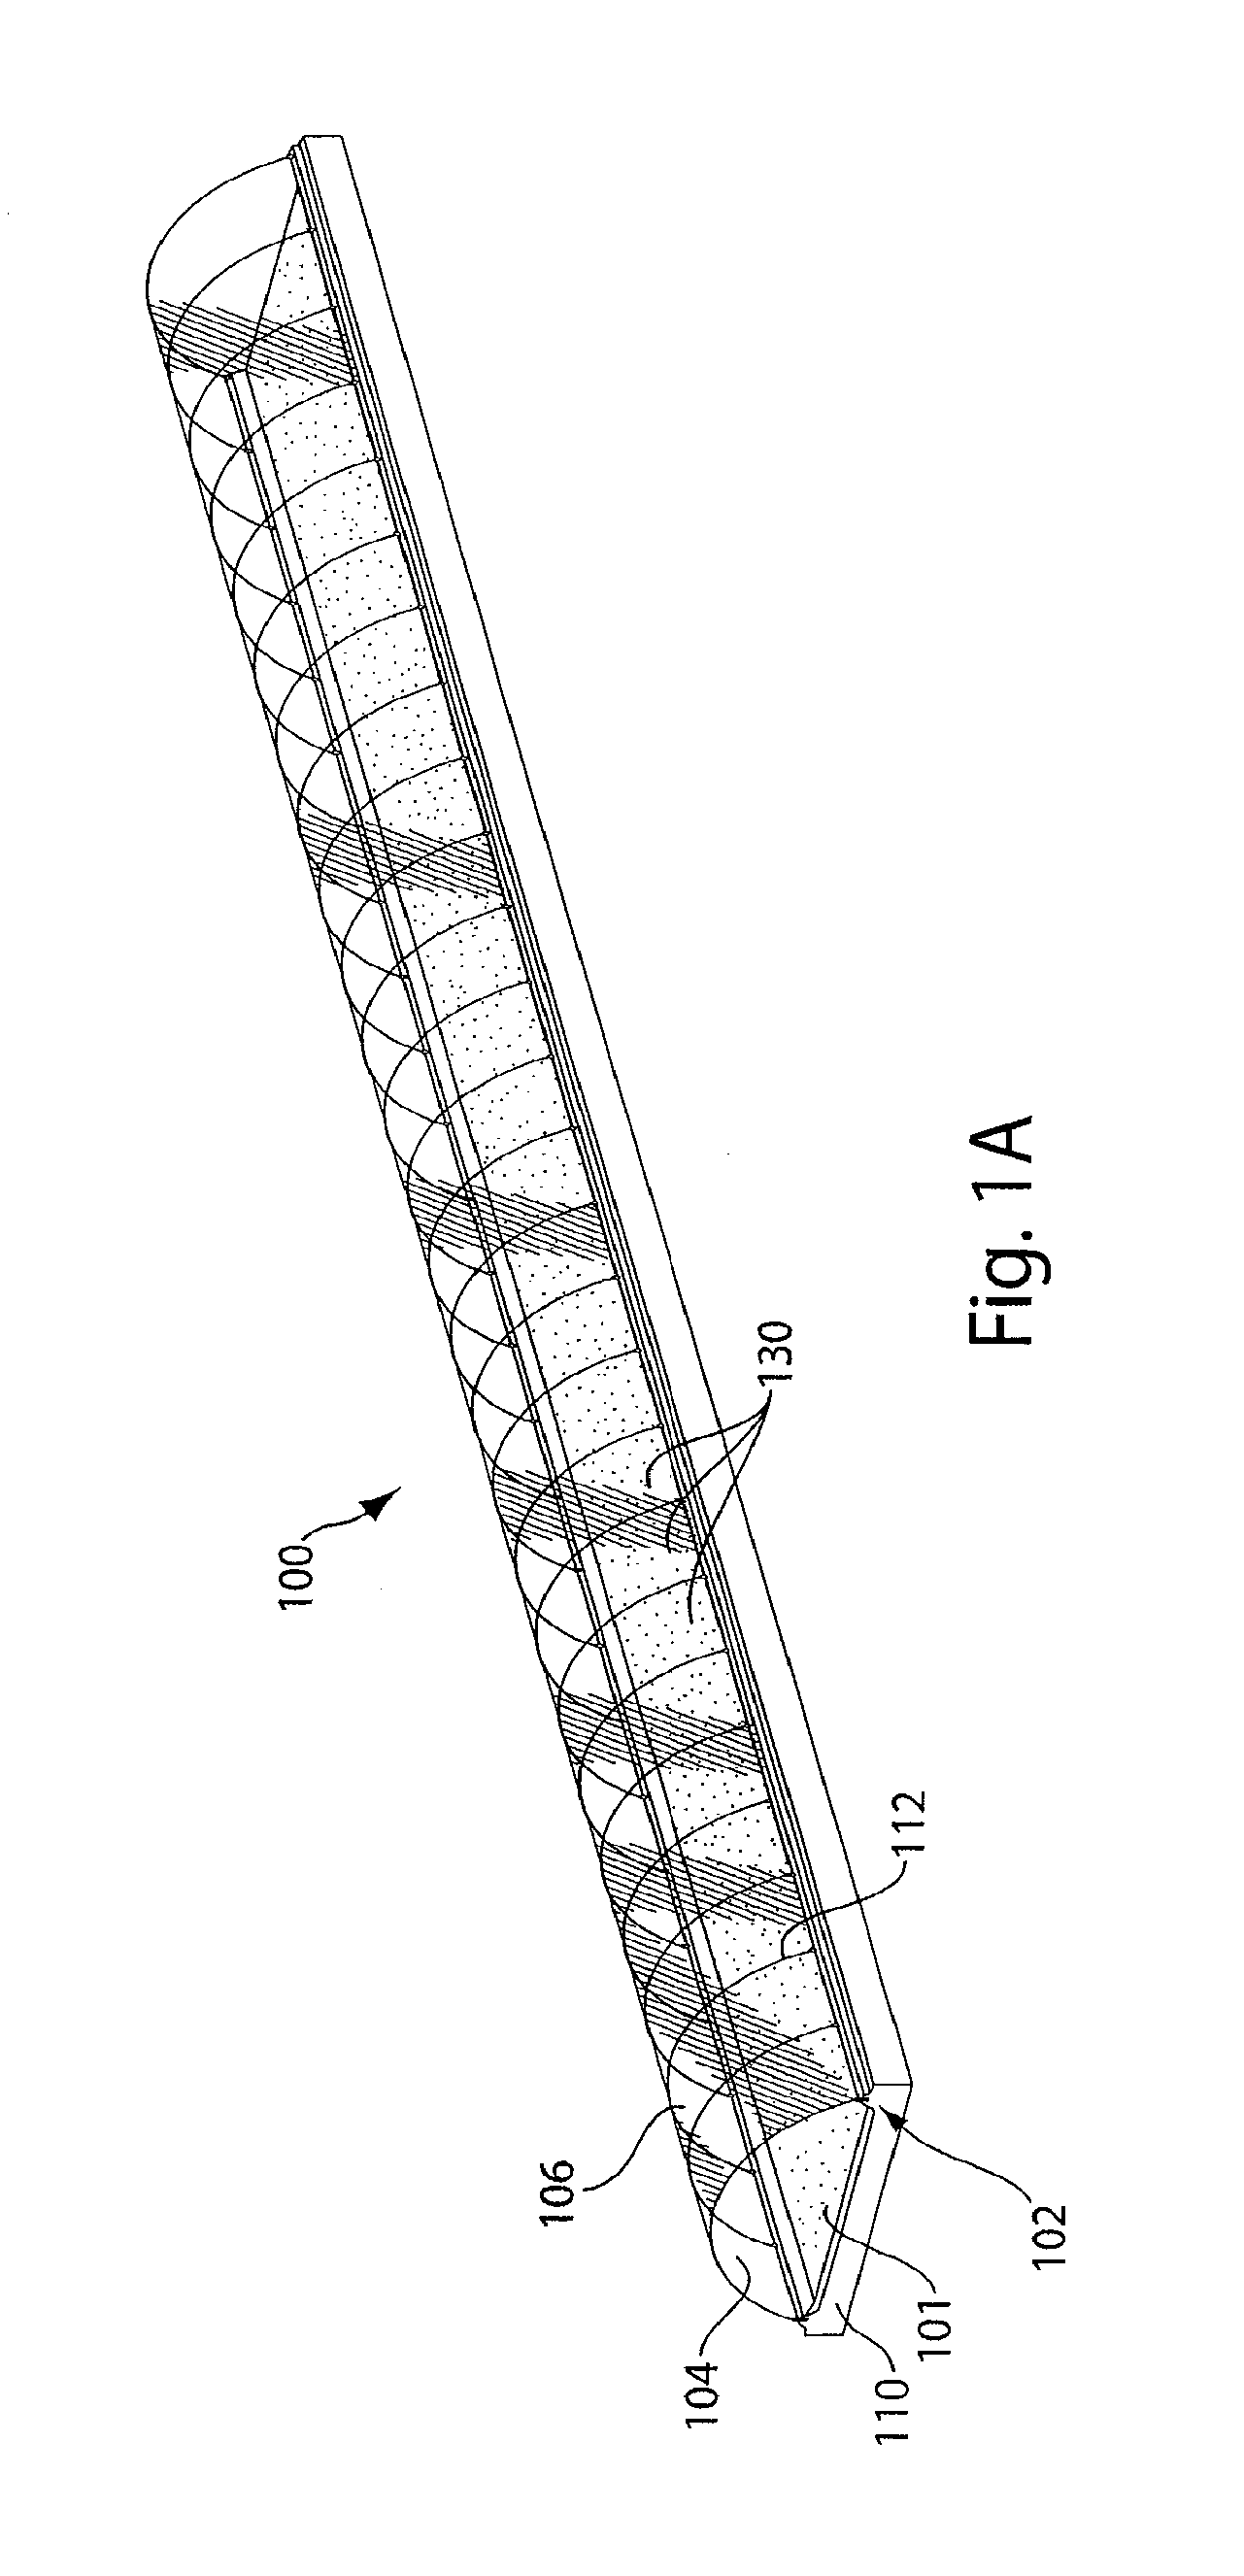 Photobioreactor Systems and Methods for Treating CO2-Enriched Gas and Producing Biomass